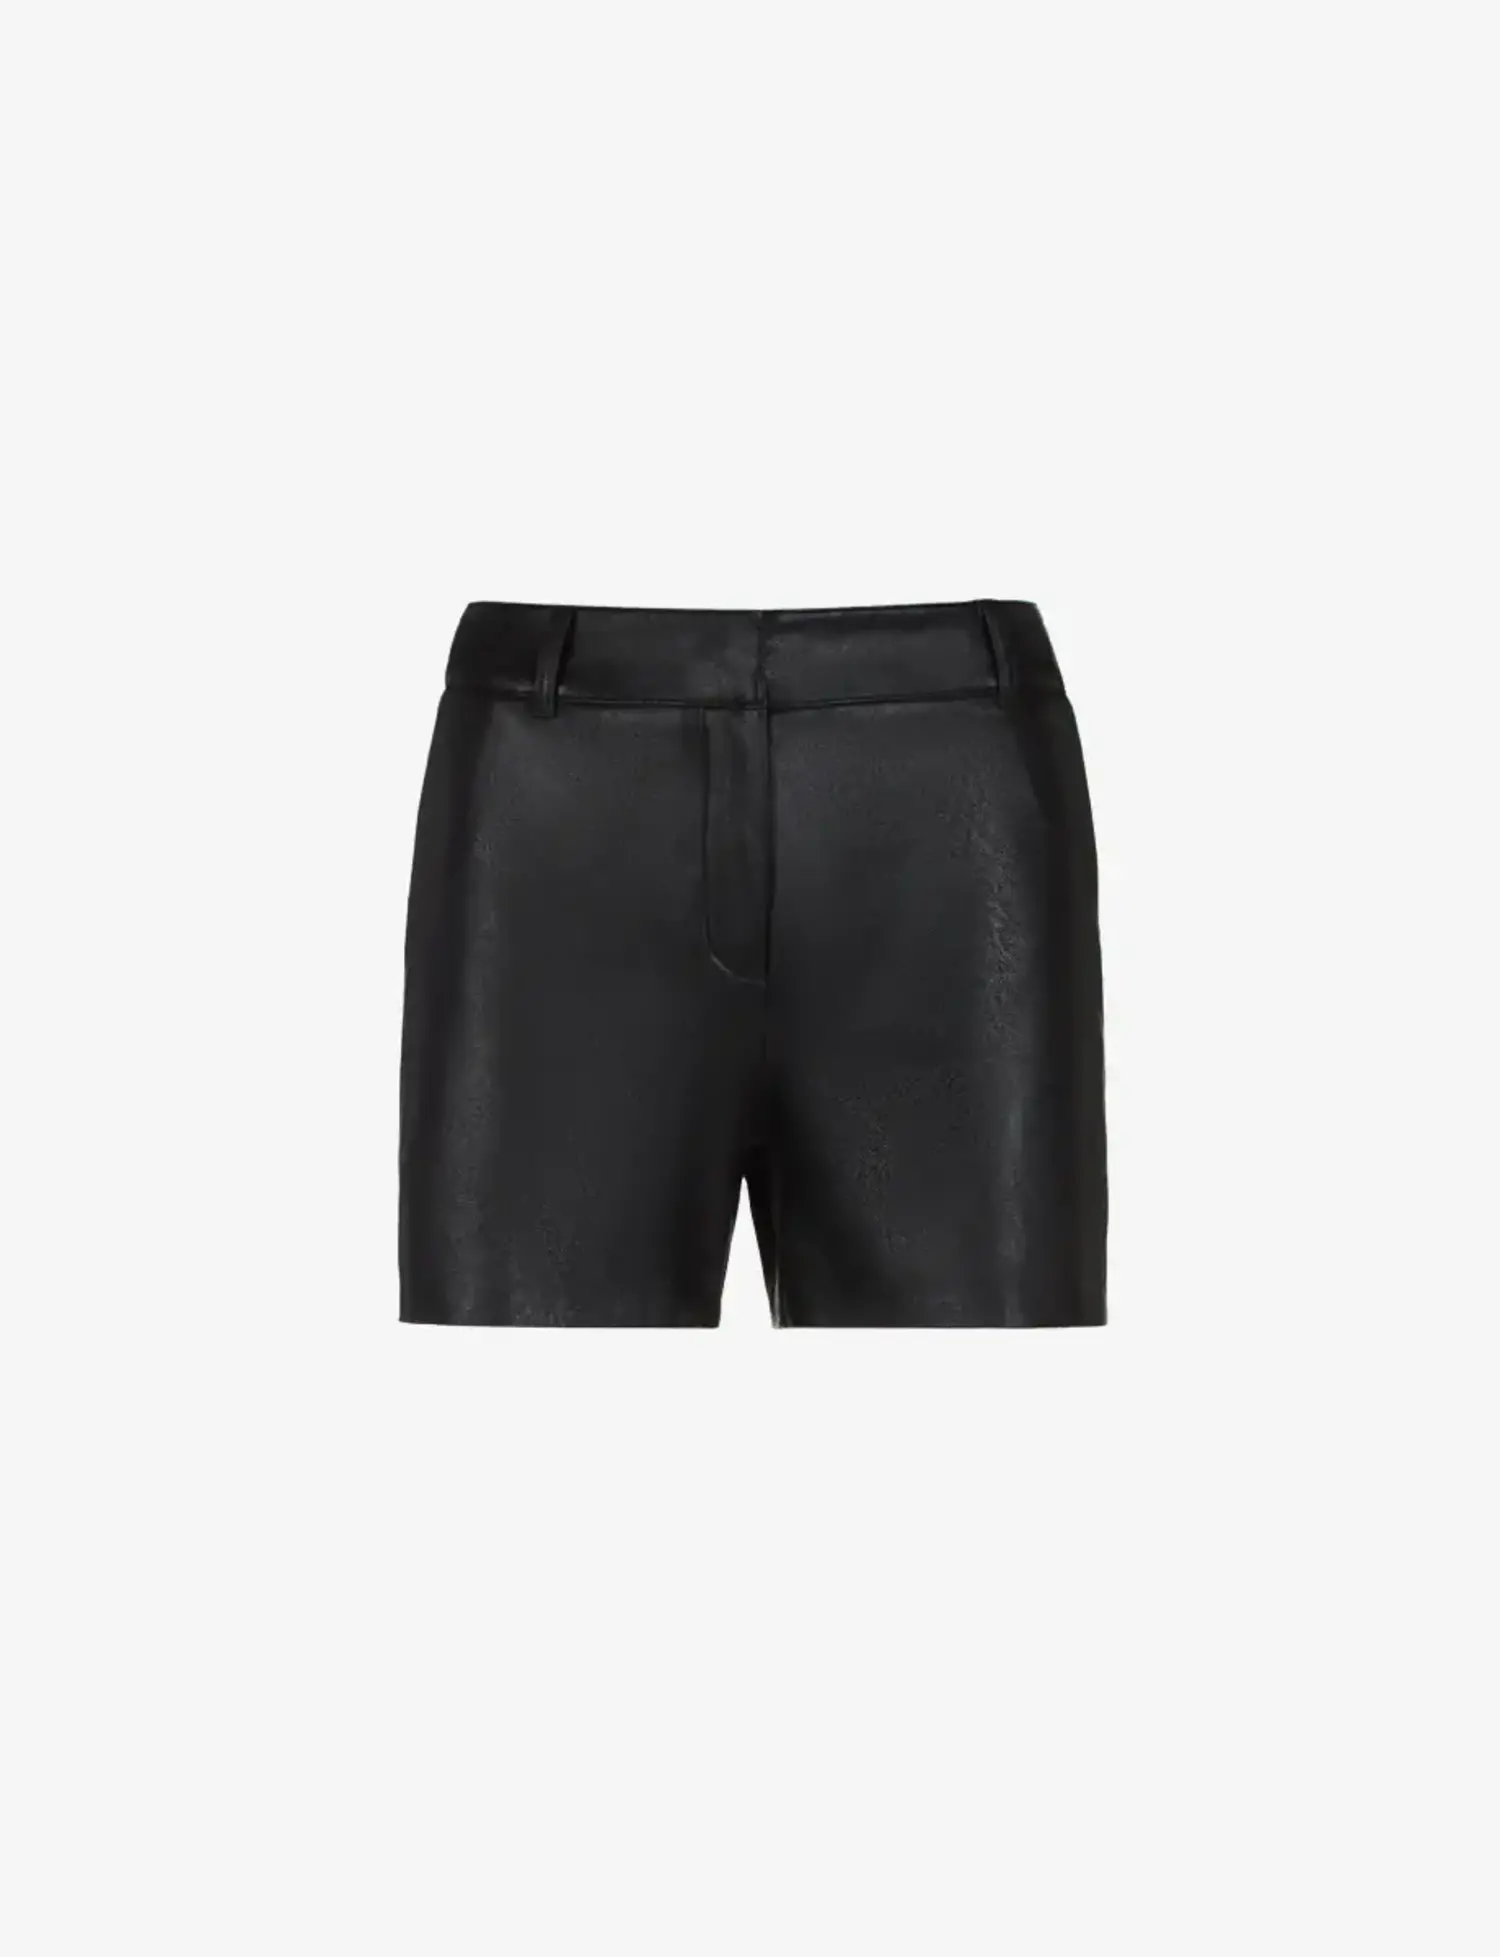 Commando  Faux Leather Tailored Short Black - Tryst Boutique